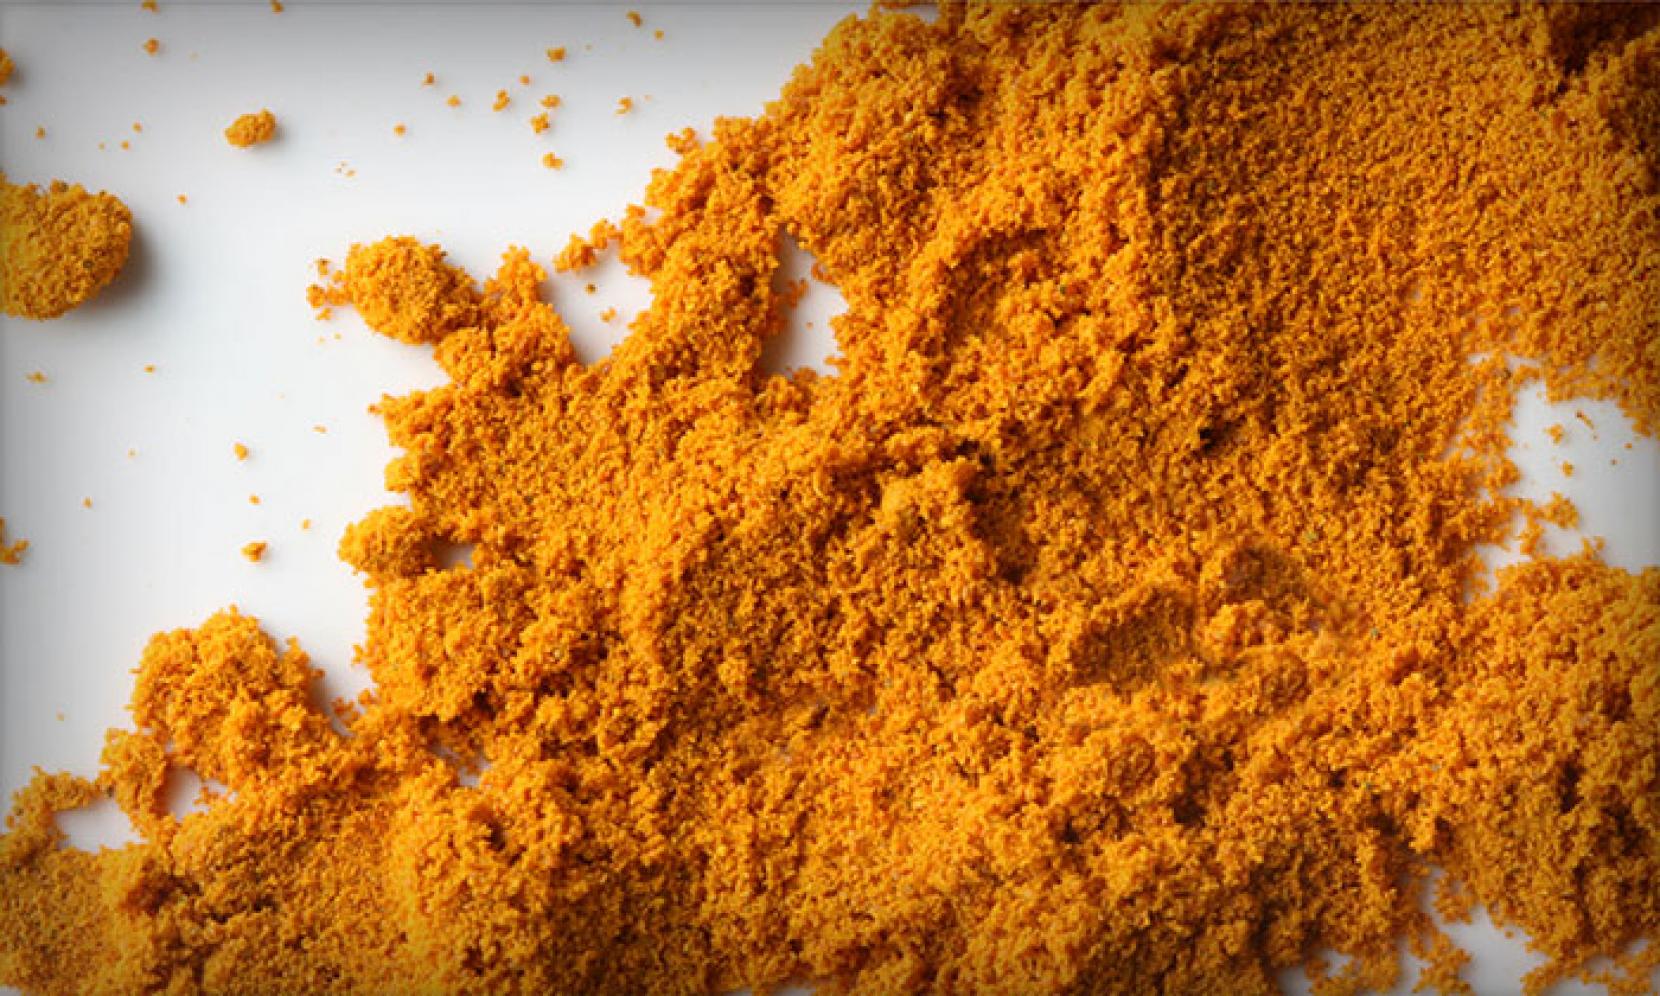 Curcumin combined with other nutrients has anti-cancer properties Creative Commons Attribution 2.0 Generic license. Photo credit: Steven Jackson